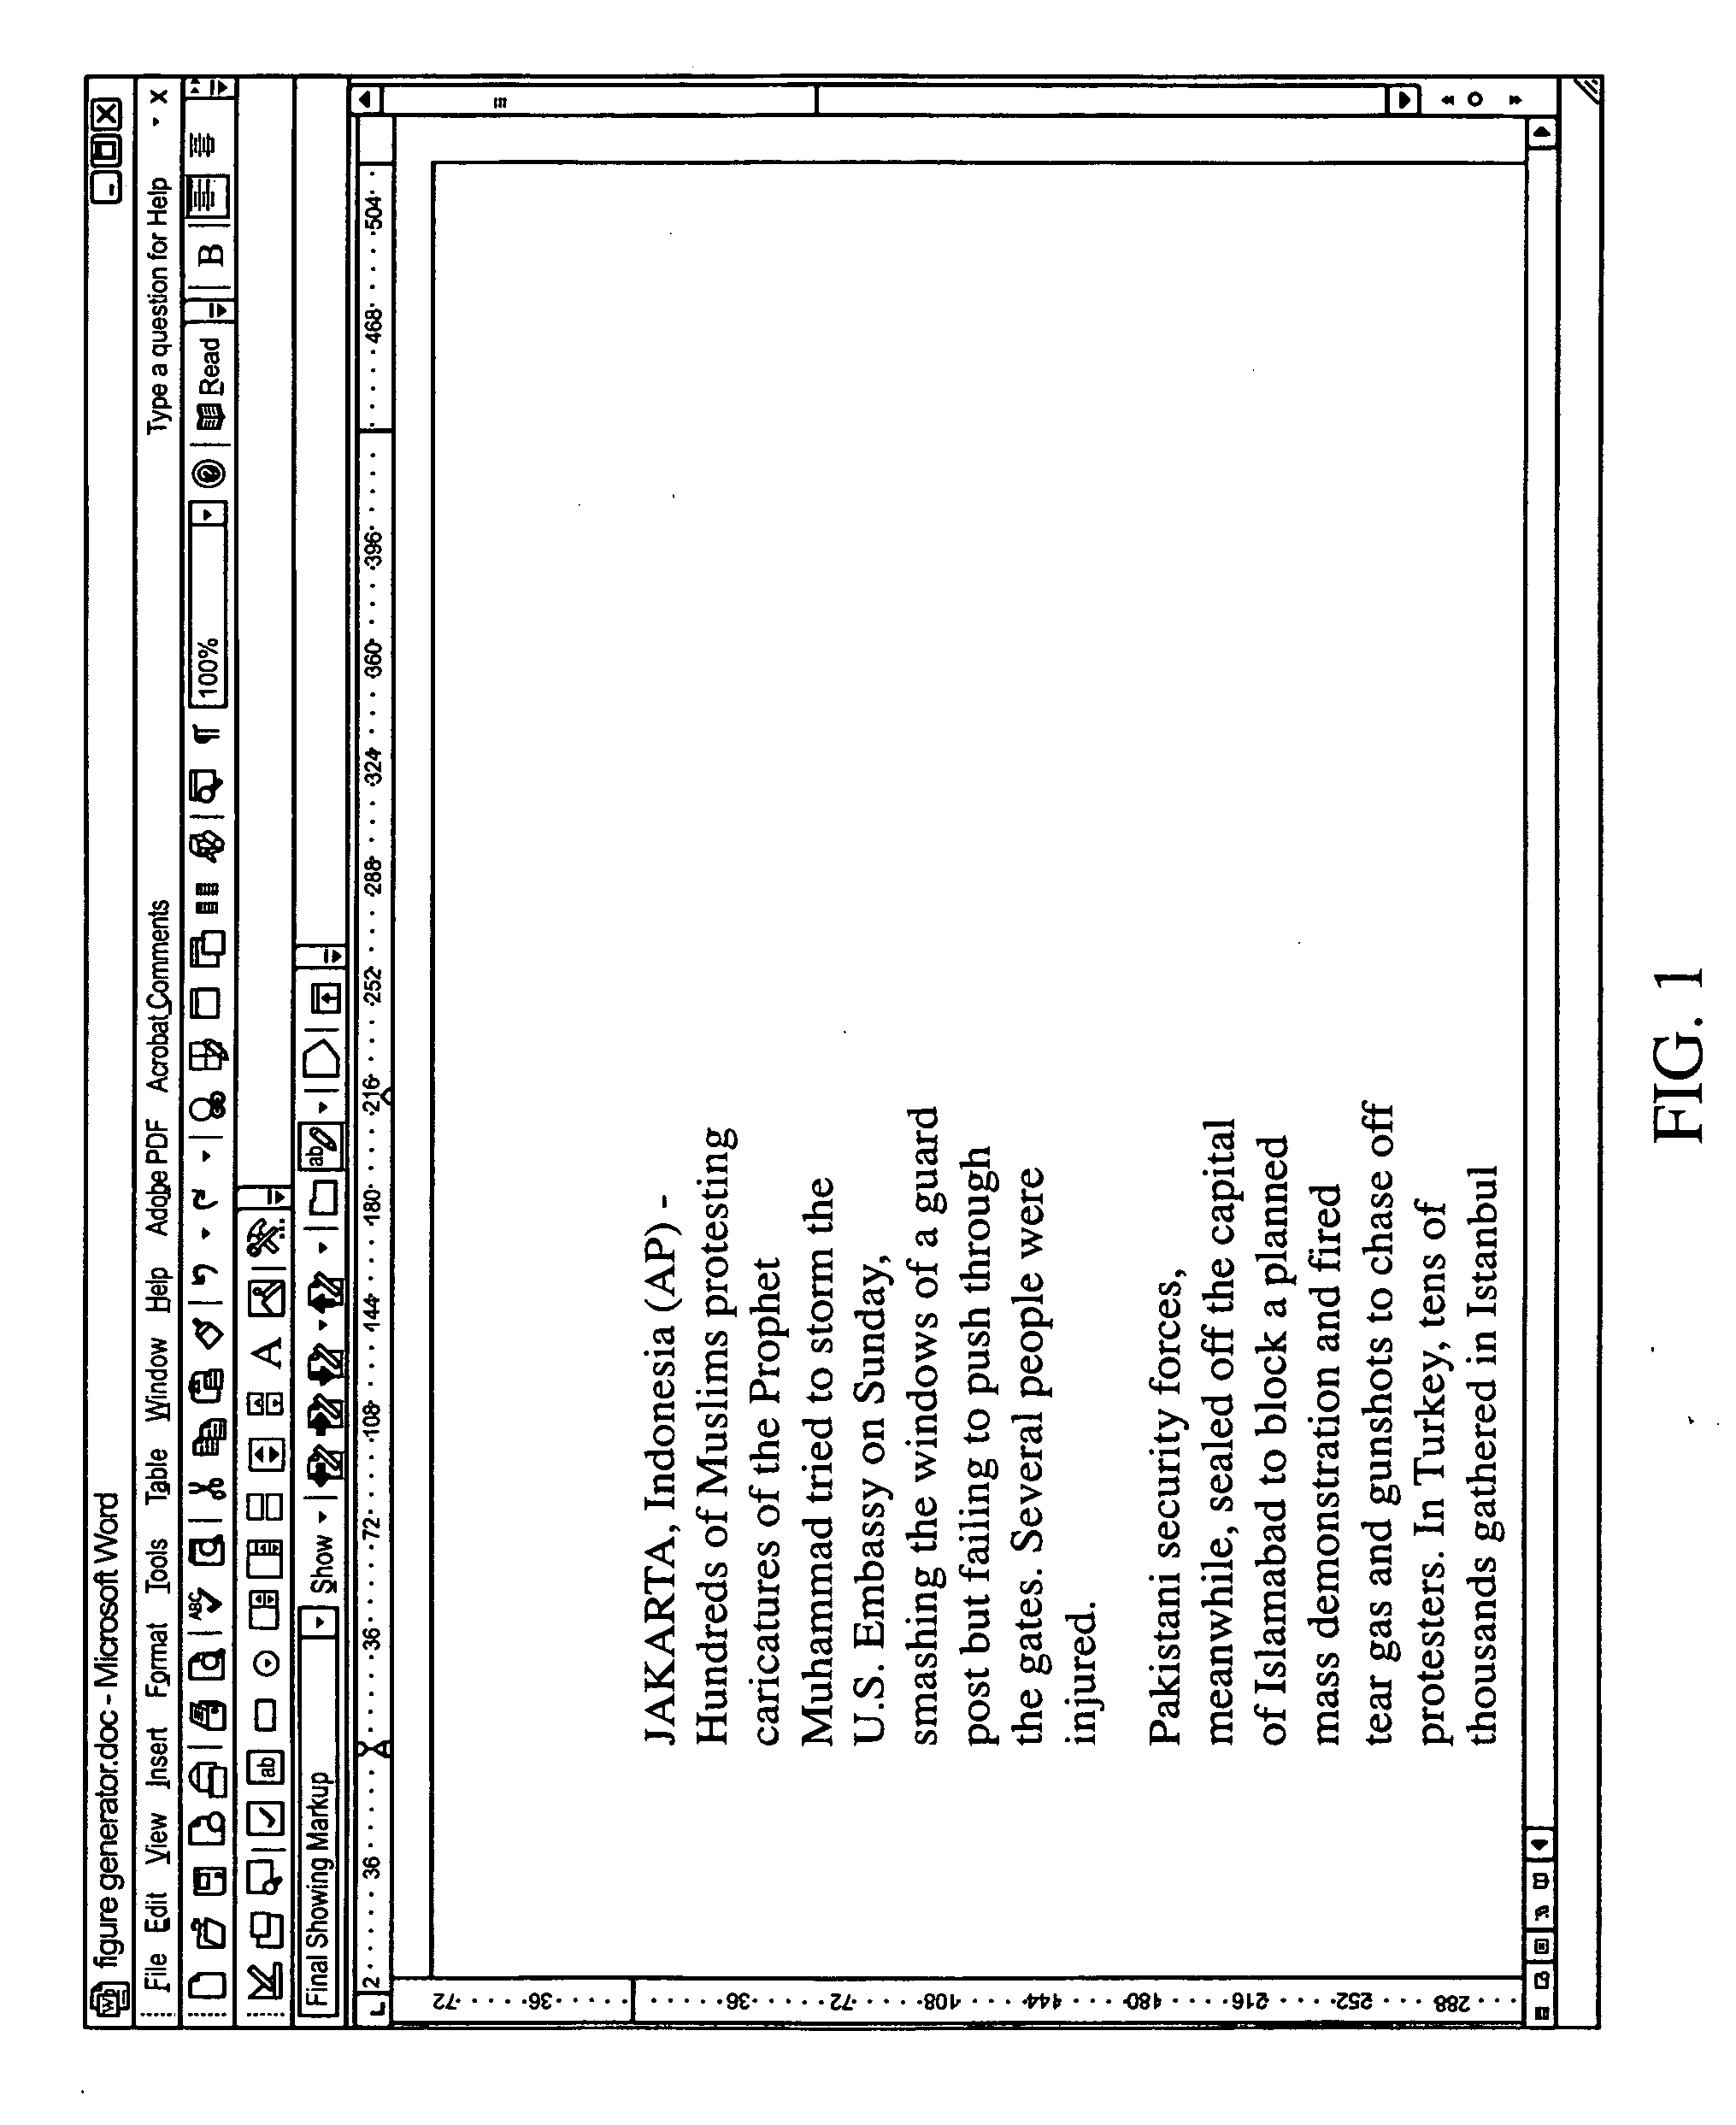 System, methods and applications for embedded internet searching and result display